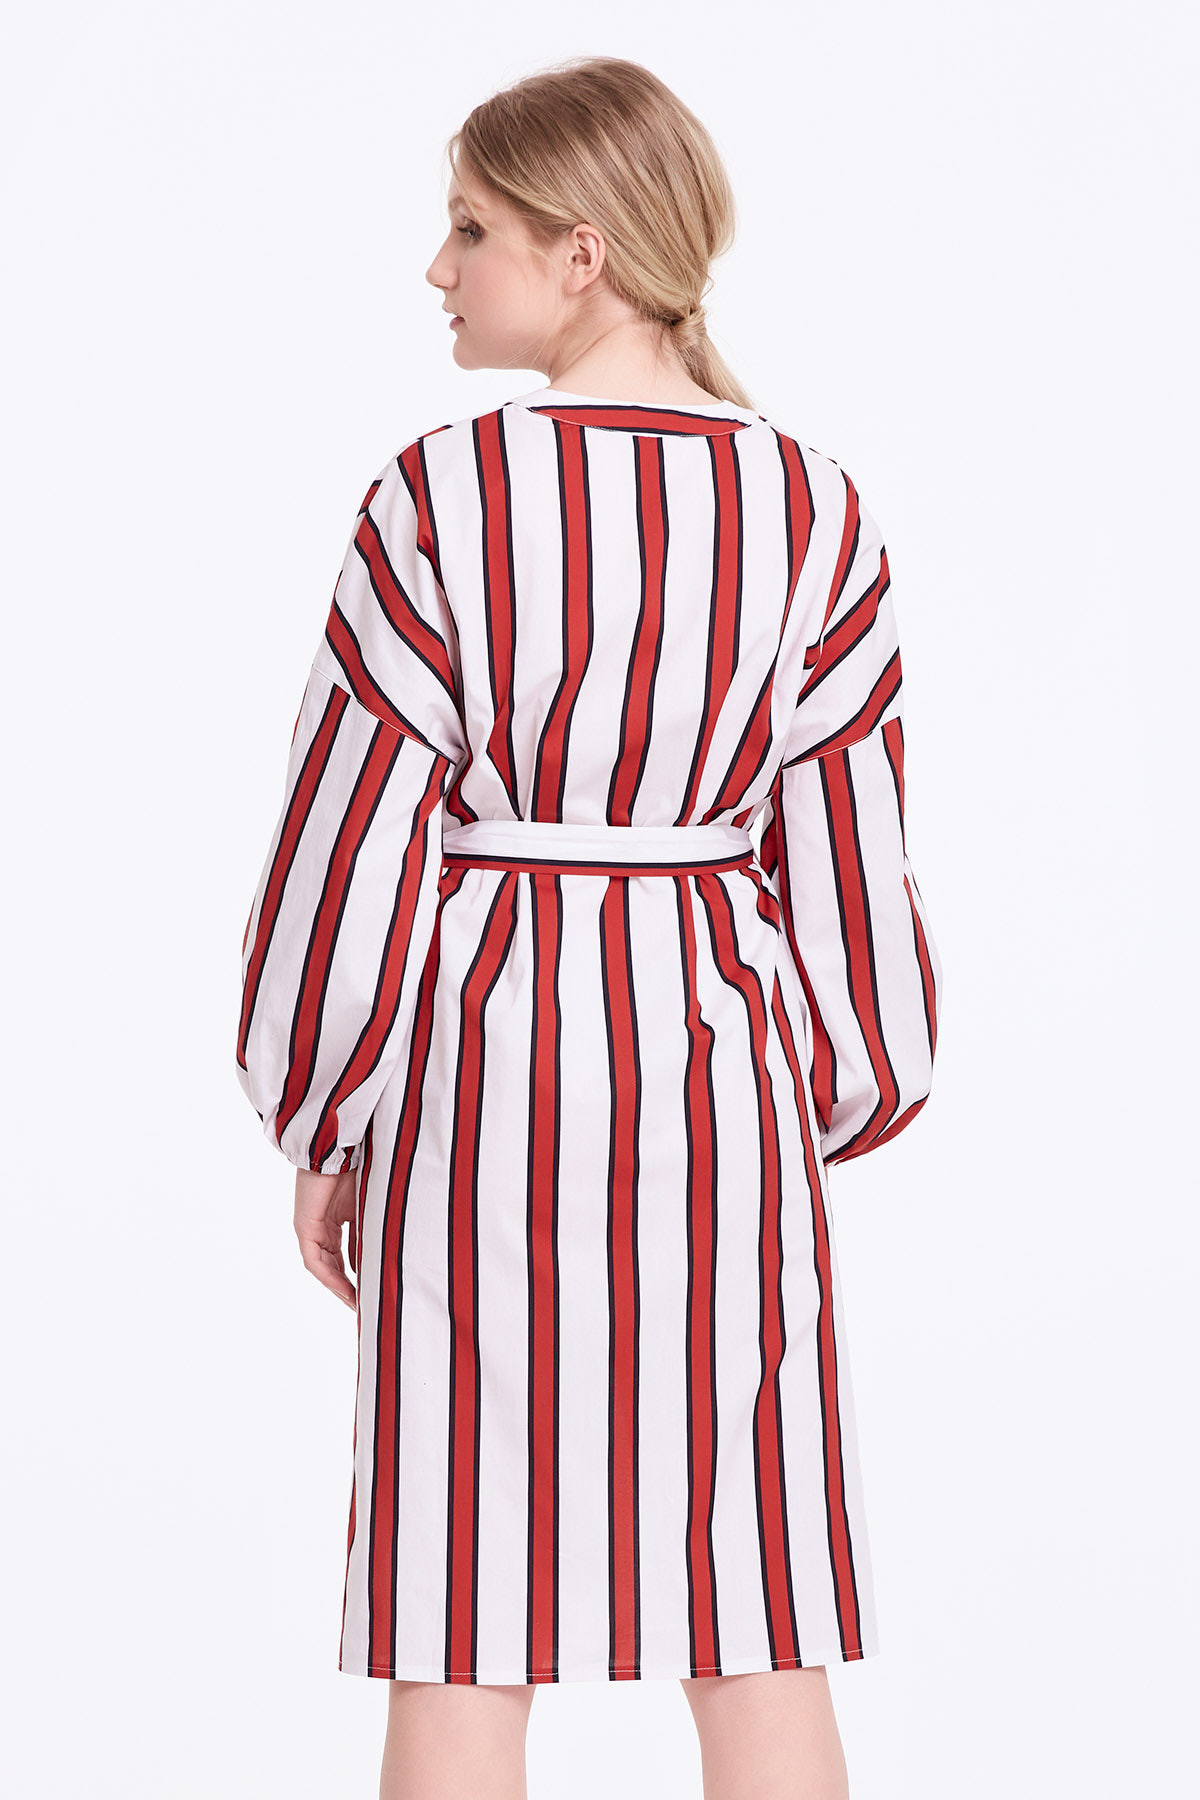 White dress with red and black stripes, photo 4